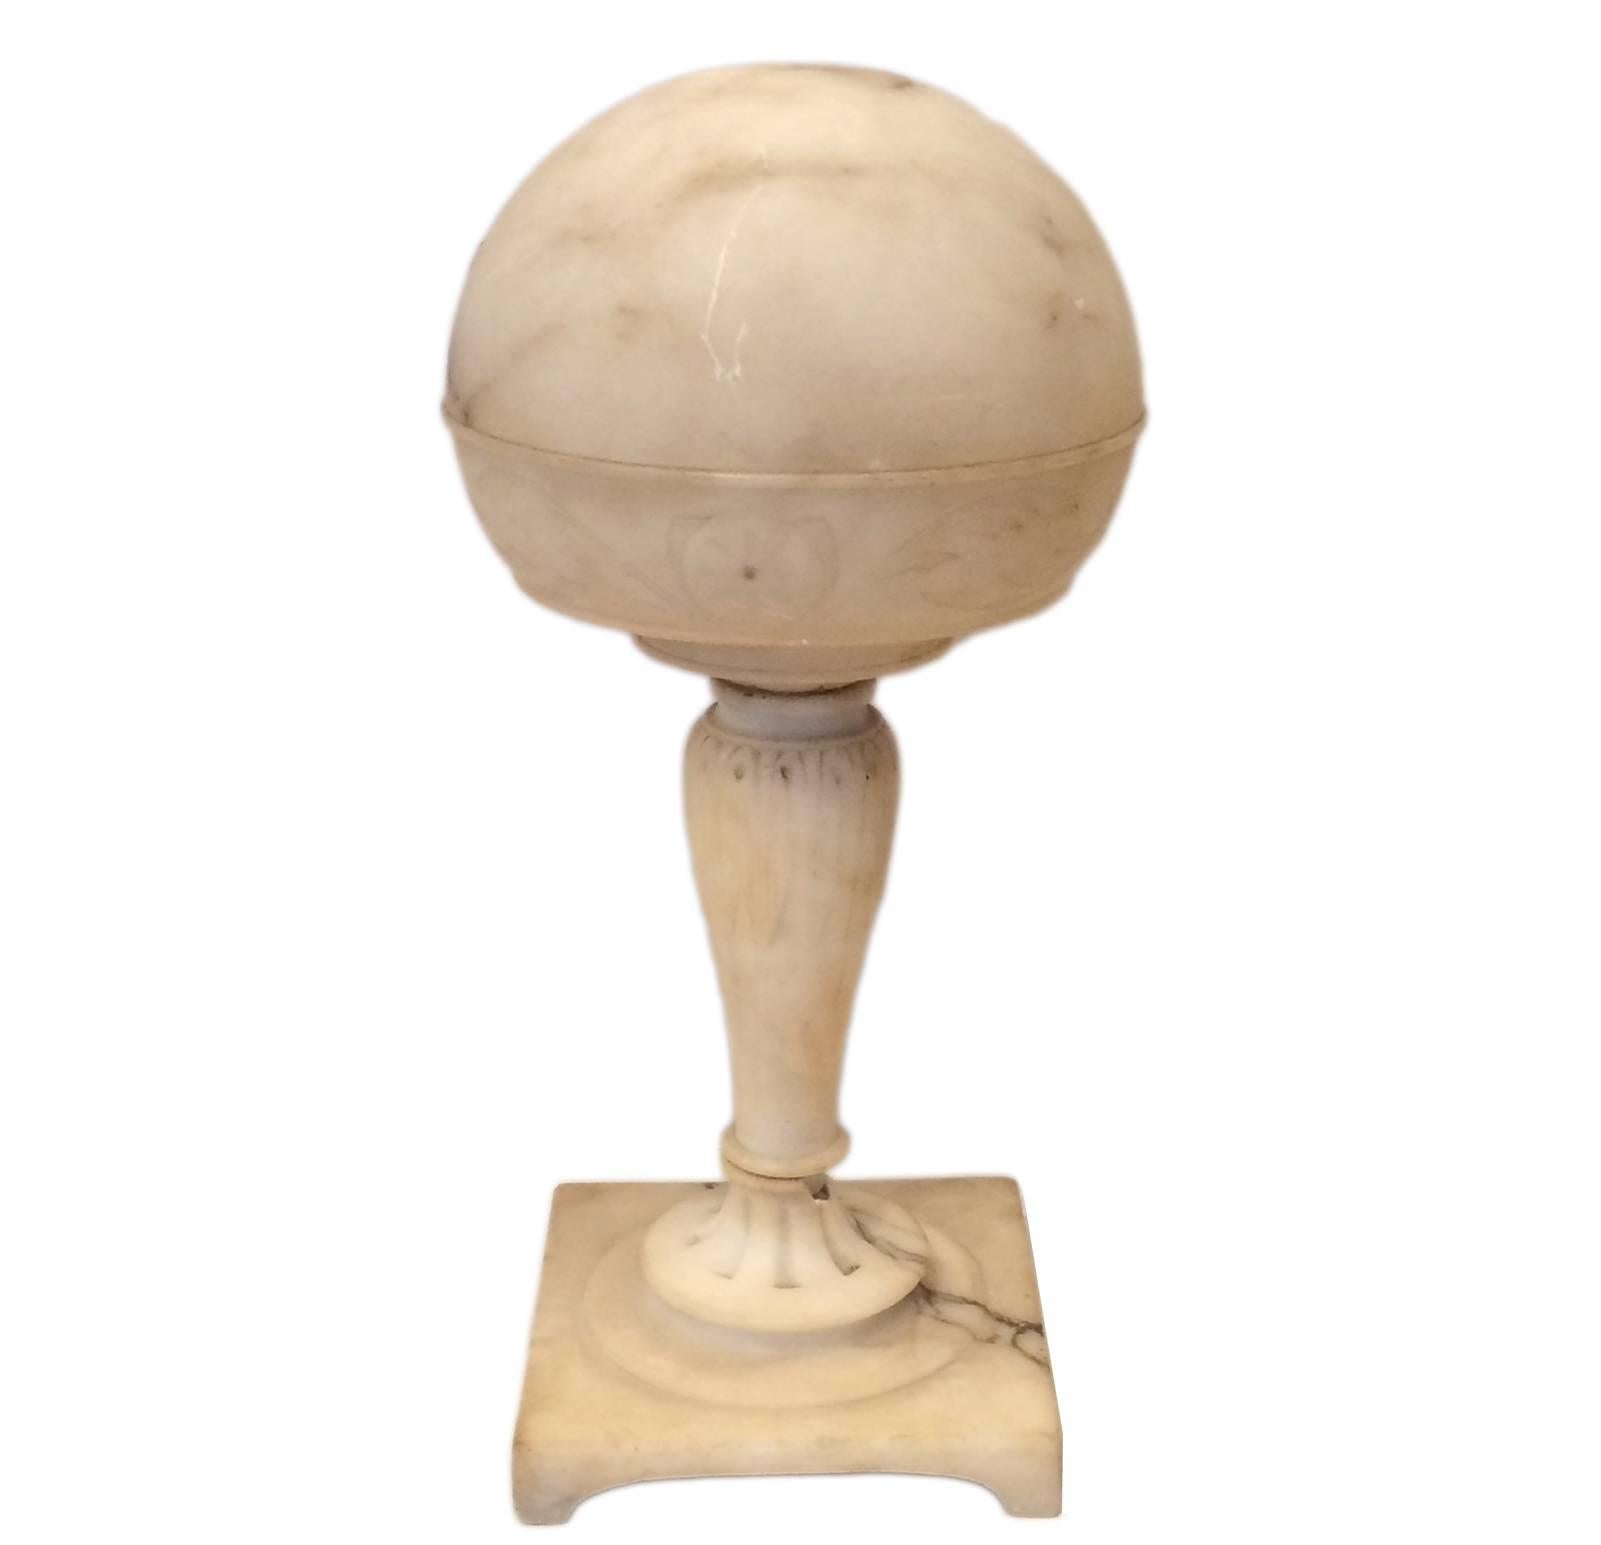 Carved alabaster lamp, with alabaster shade. Single interior light, Italian, 1920s. Very good condition, some patina.